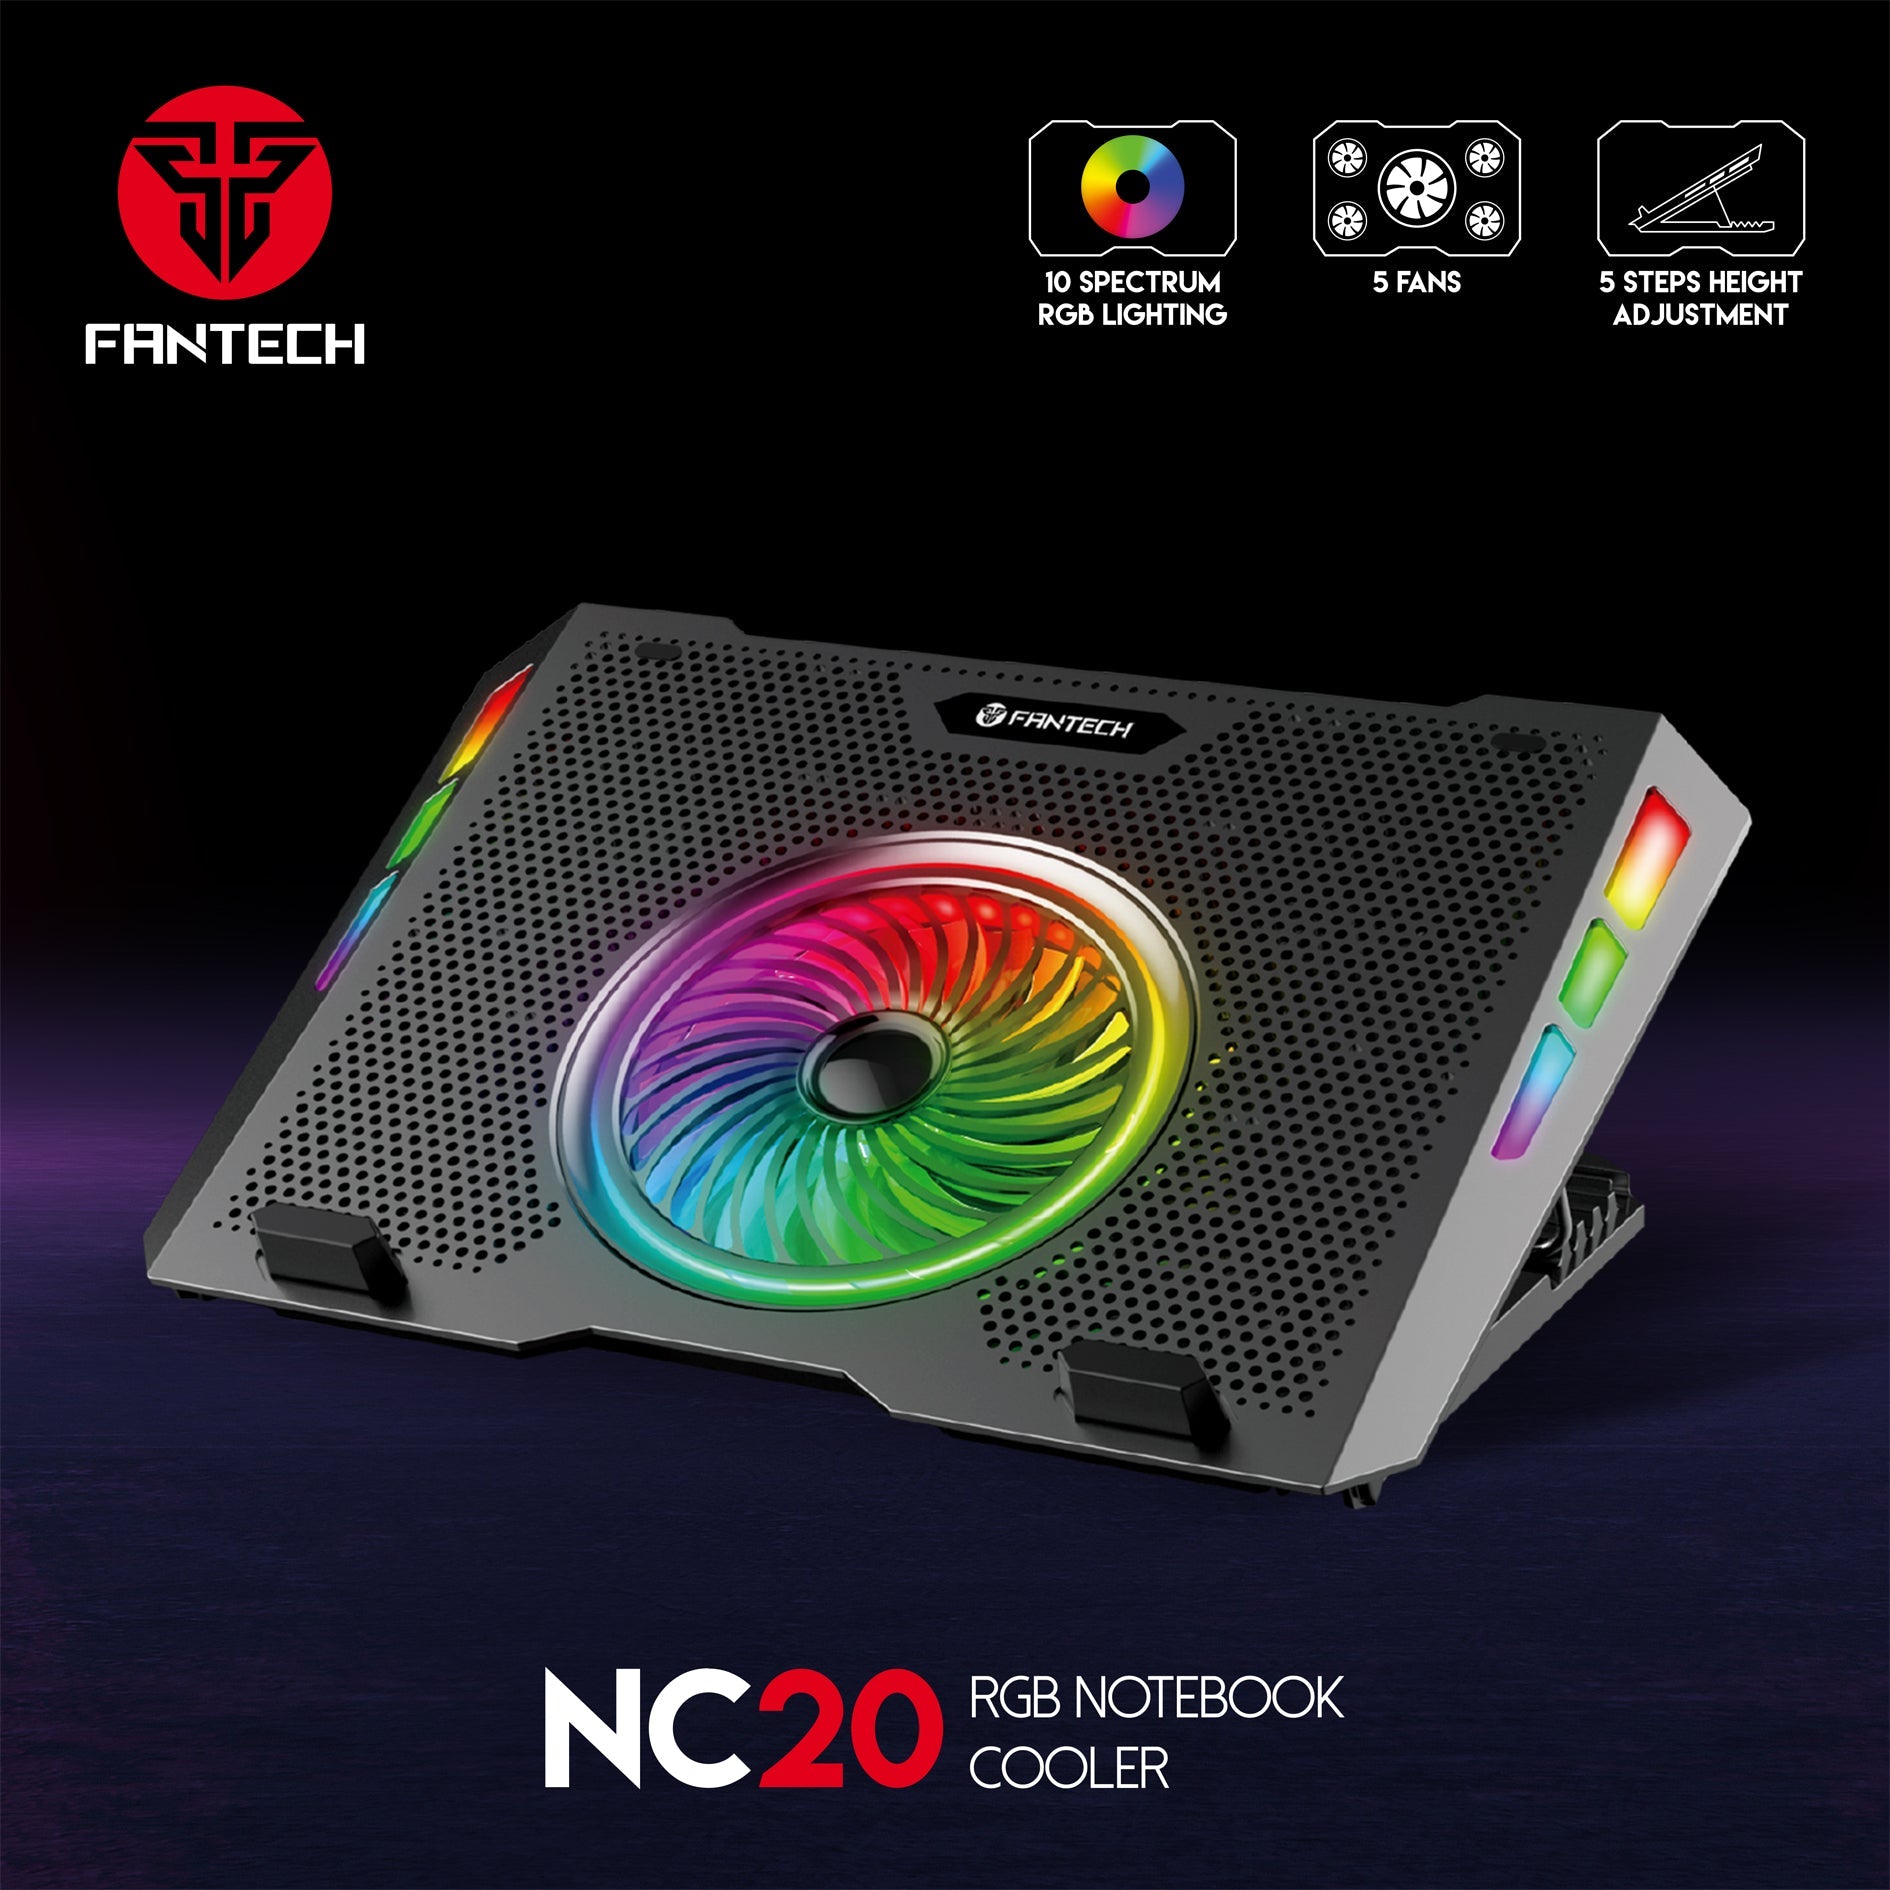 Fantech RGB Notebook Laptop Cooling Pad NC20 Cooling Stands 25 JOD